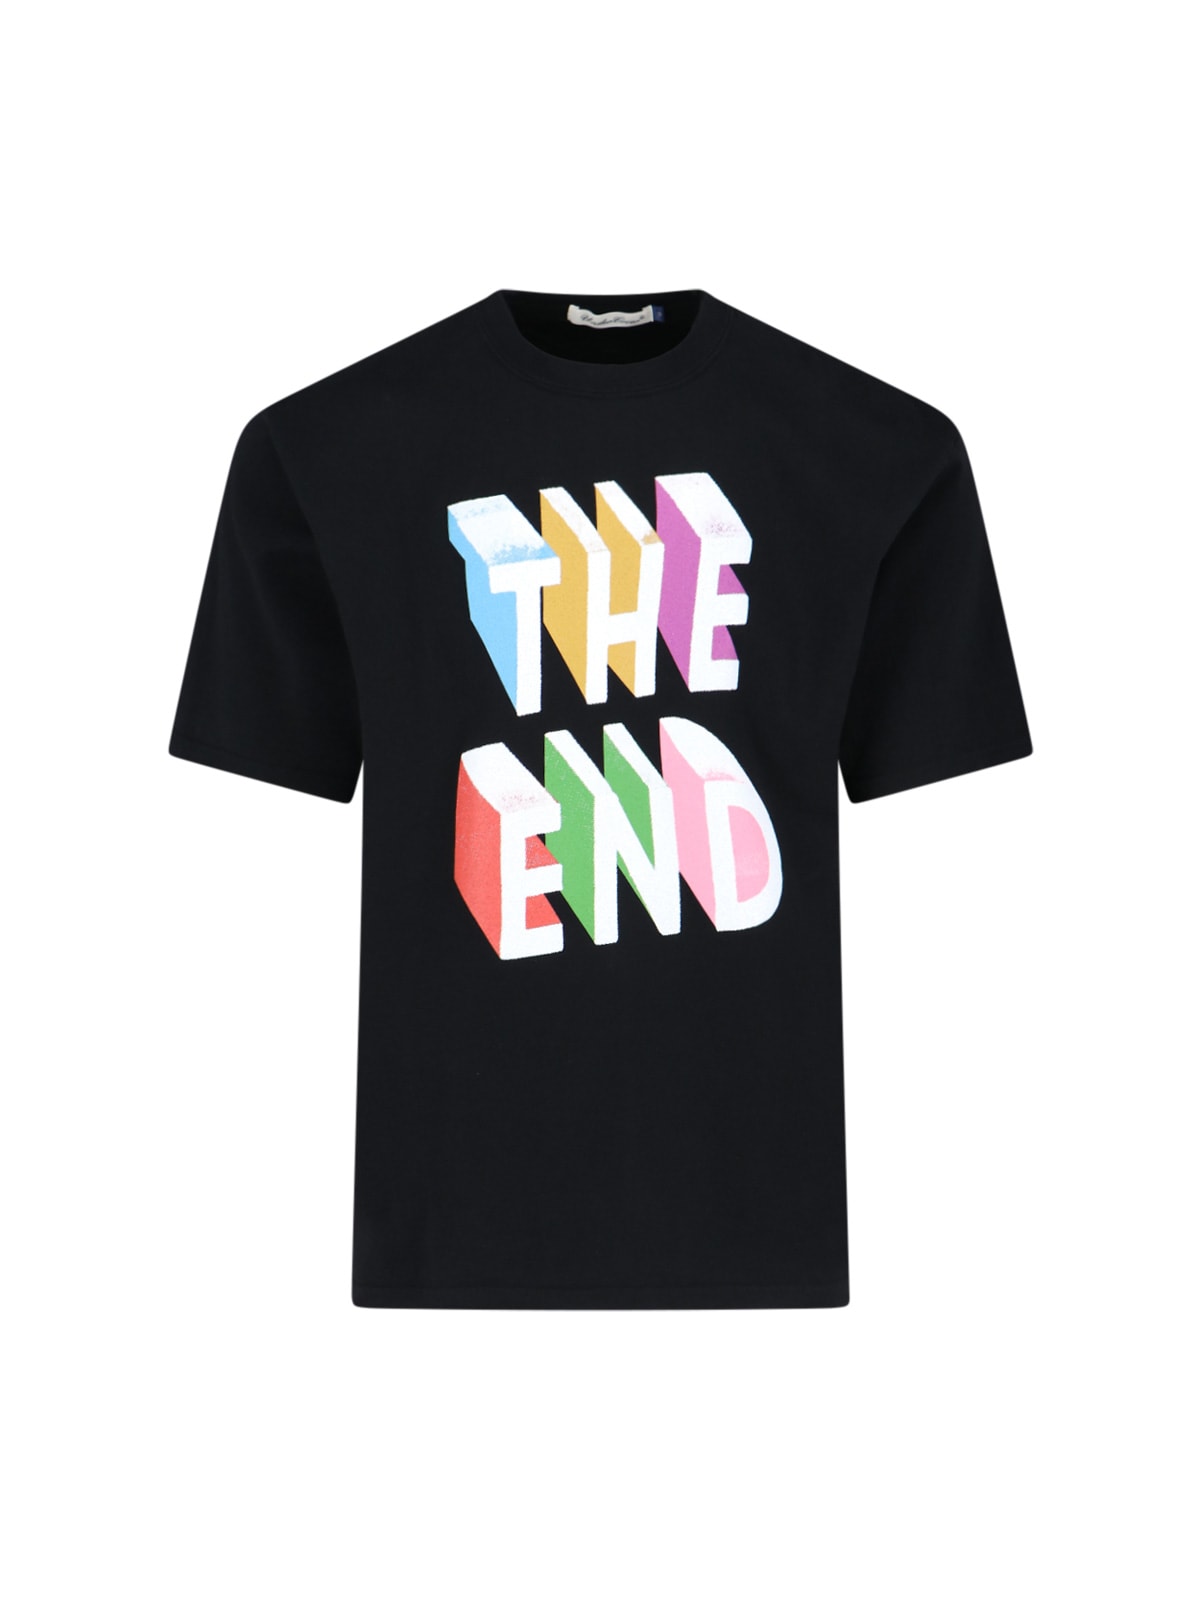 the End T-shirt